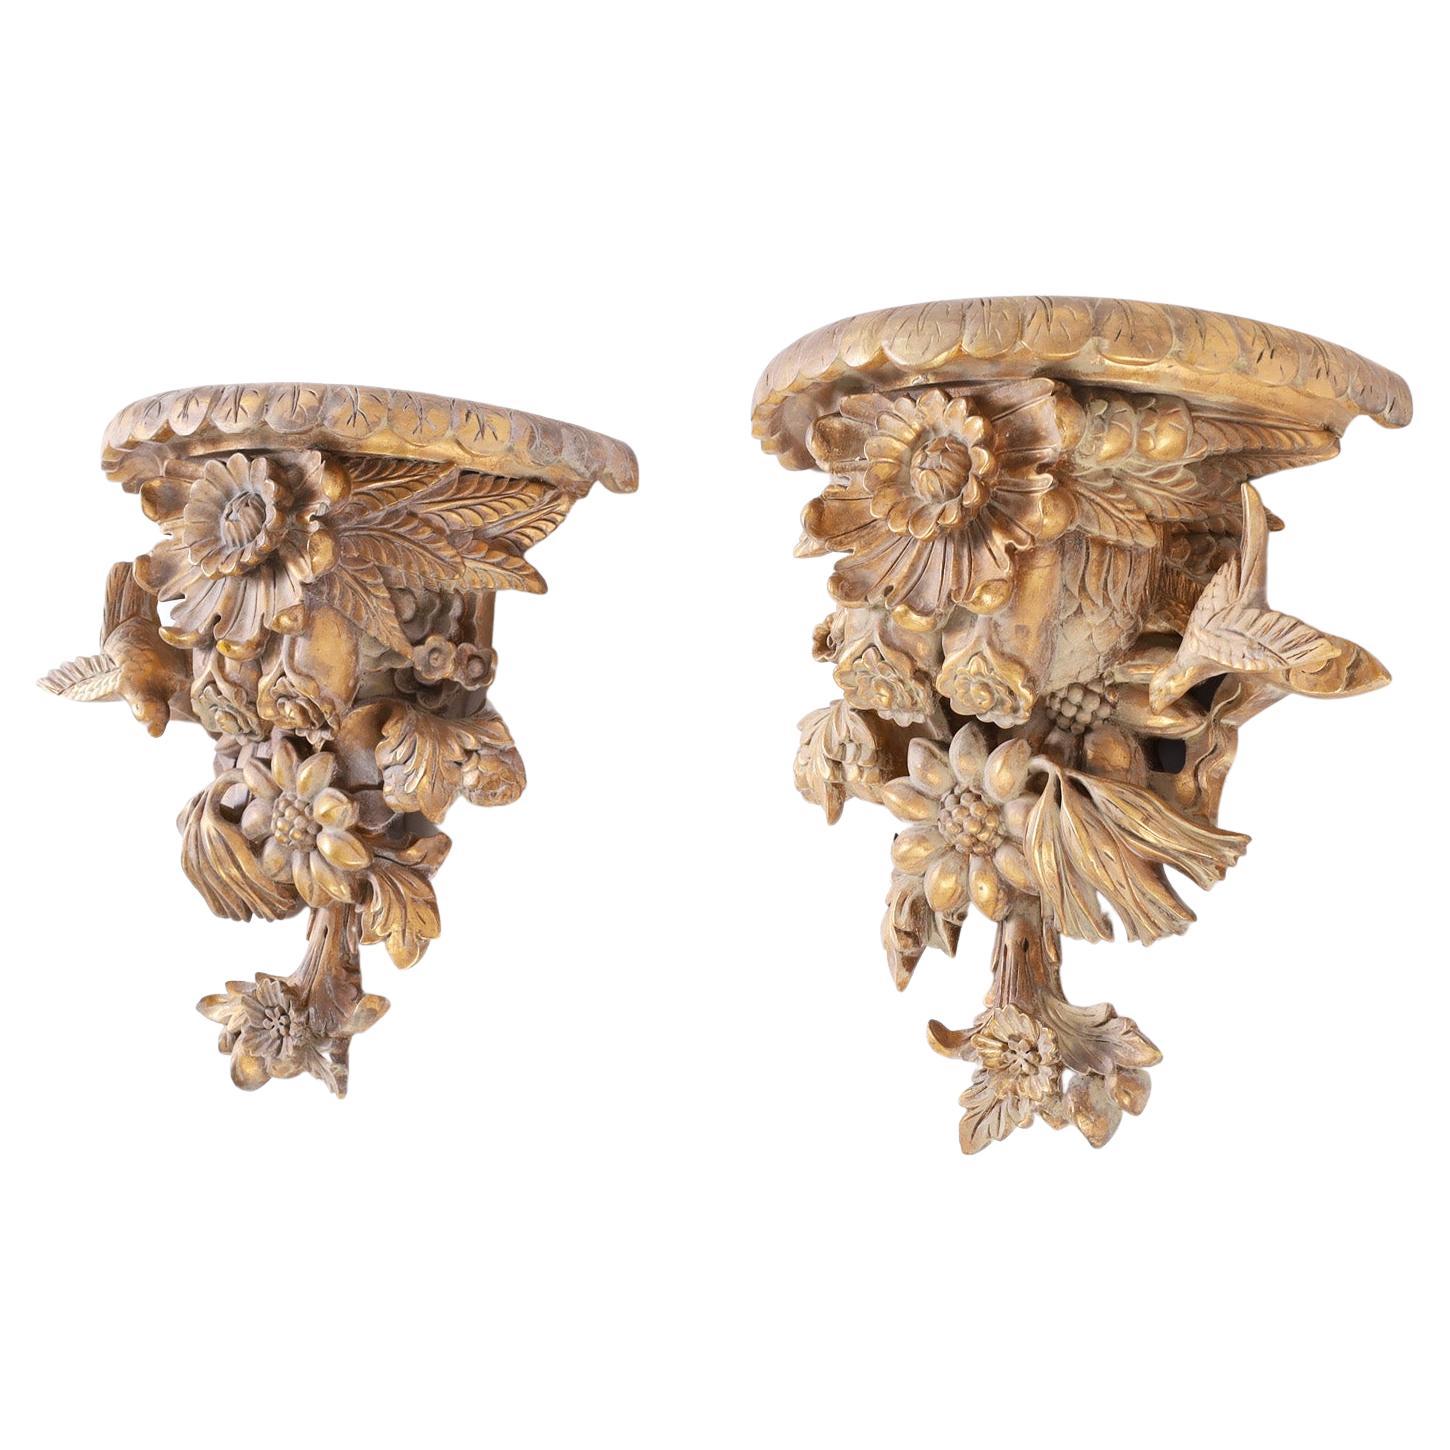 Pair of Rococo style Italian wall brackets crafted in wood, expertly carved with a flower and bird motif having a white wash over gilt old world style finish.